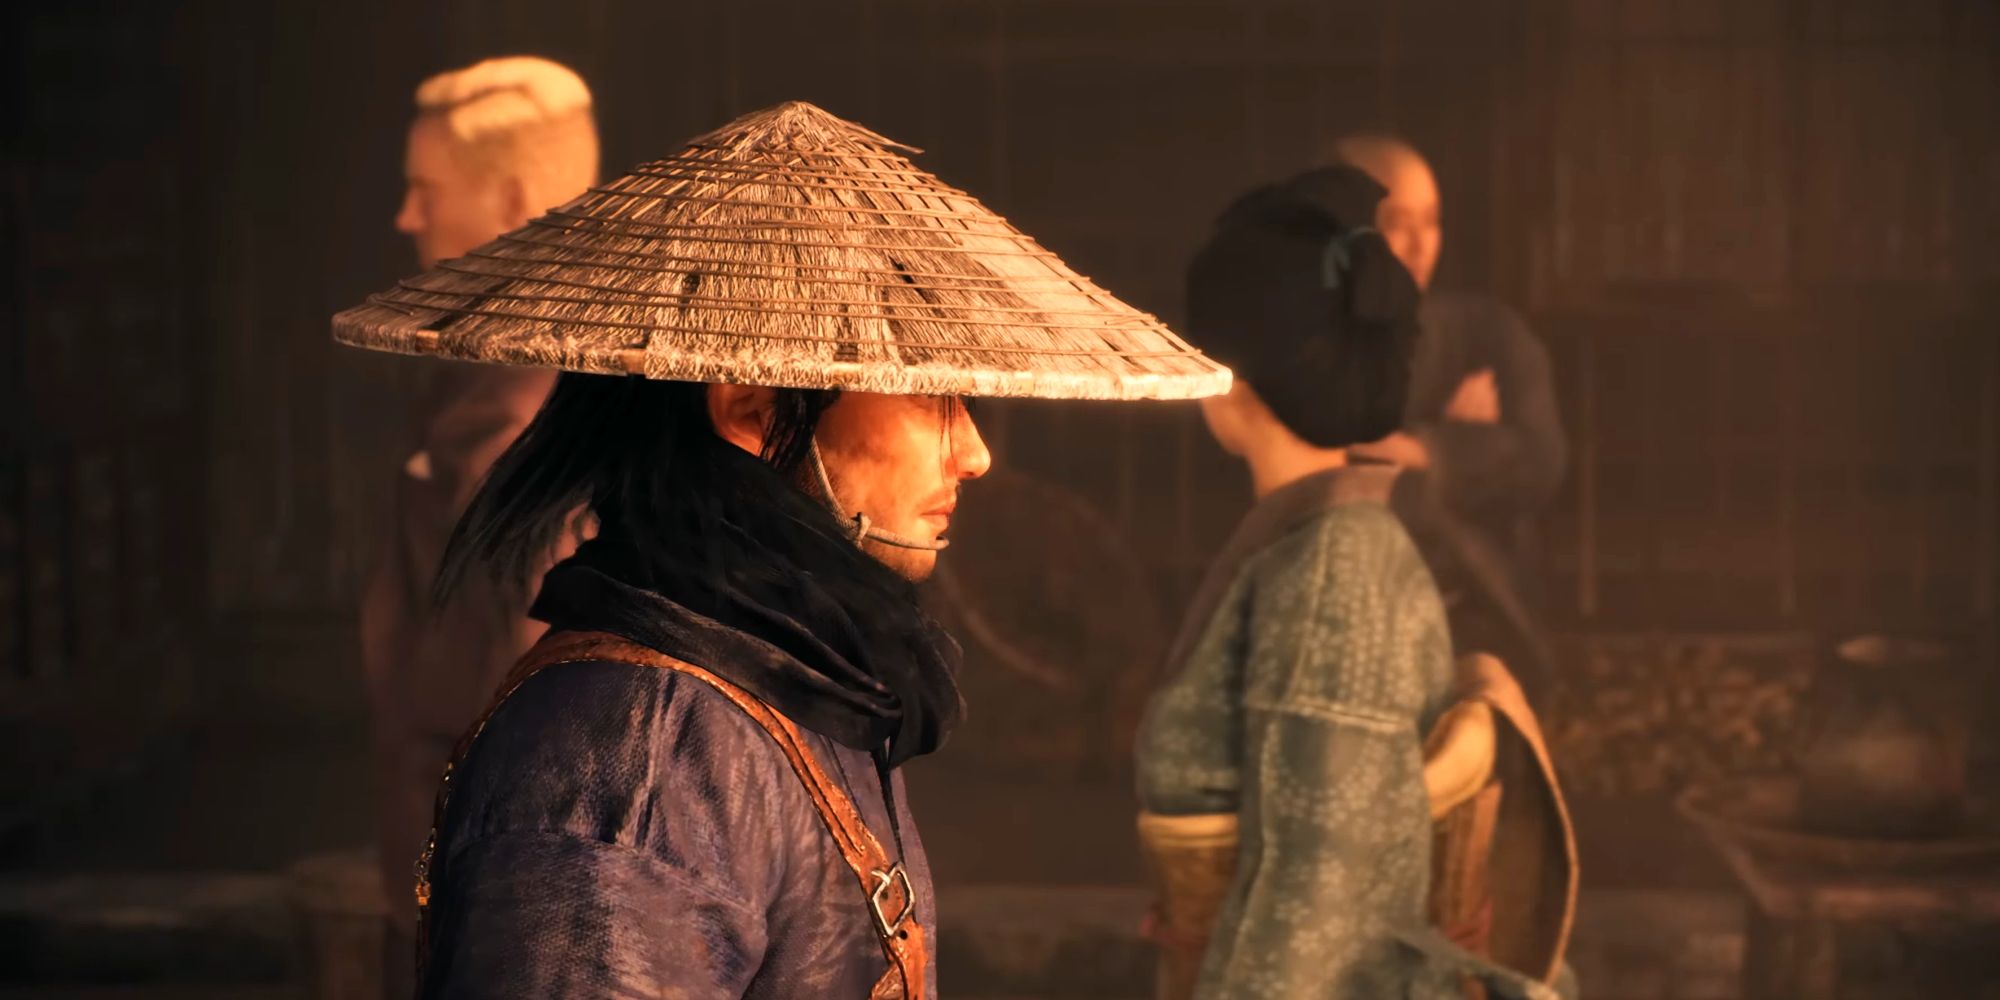 Rise of the Ronin Launches on March 22 for PS5